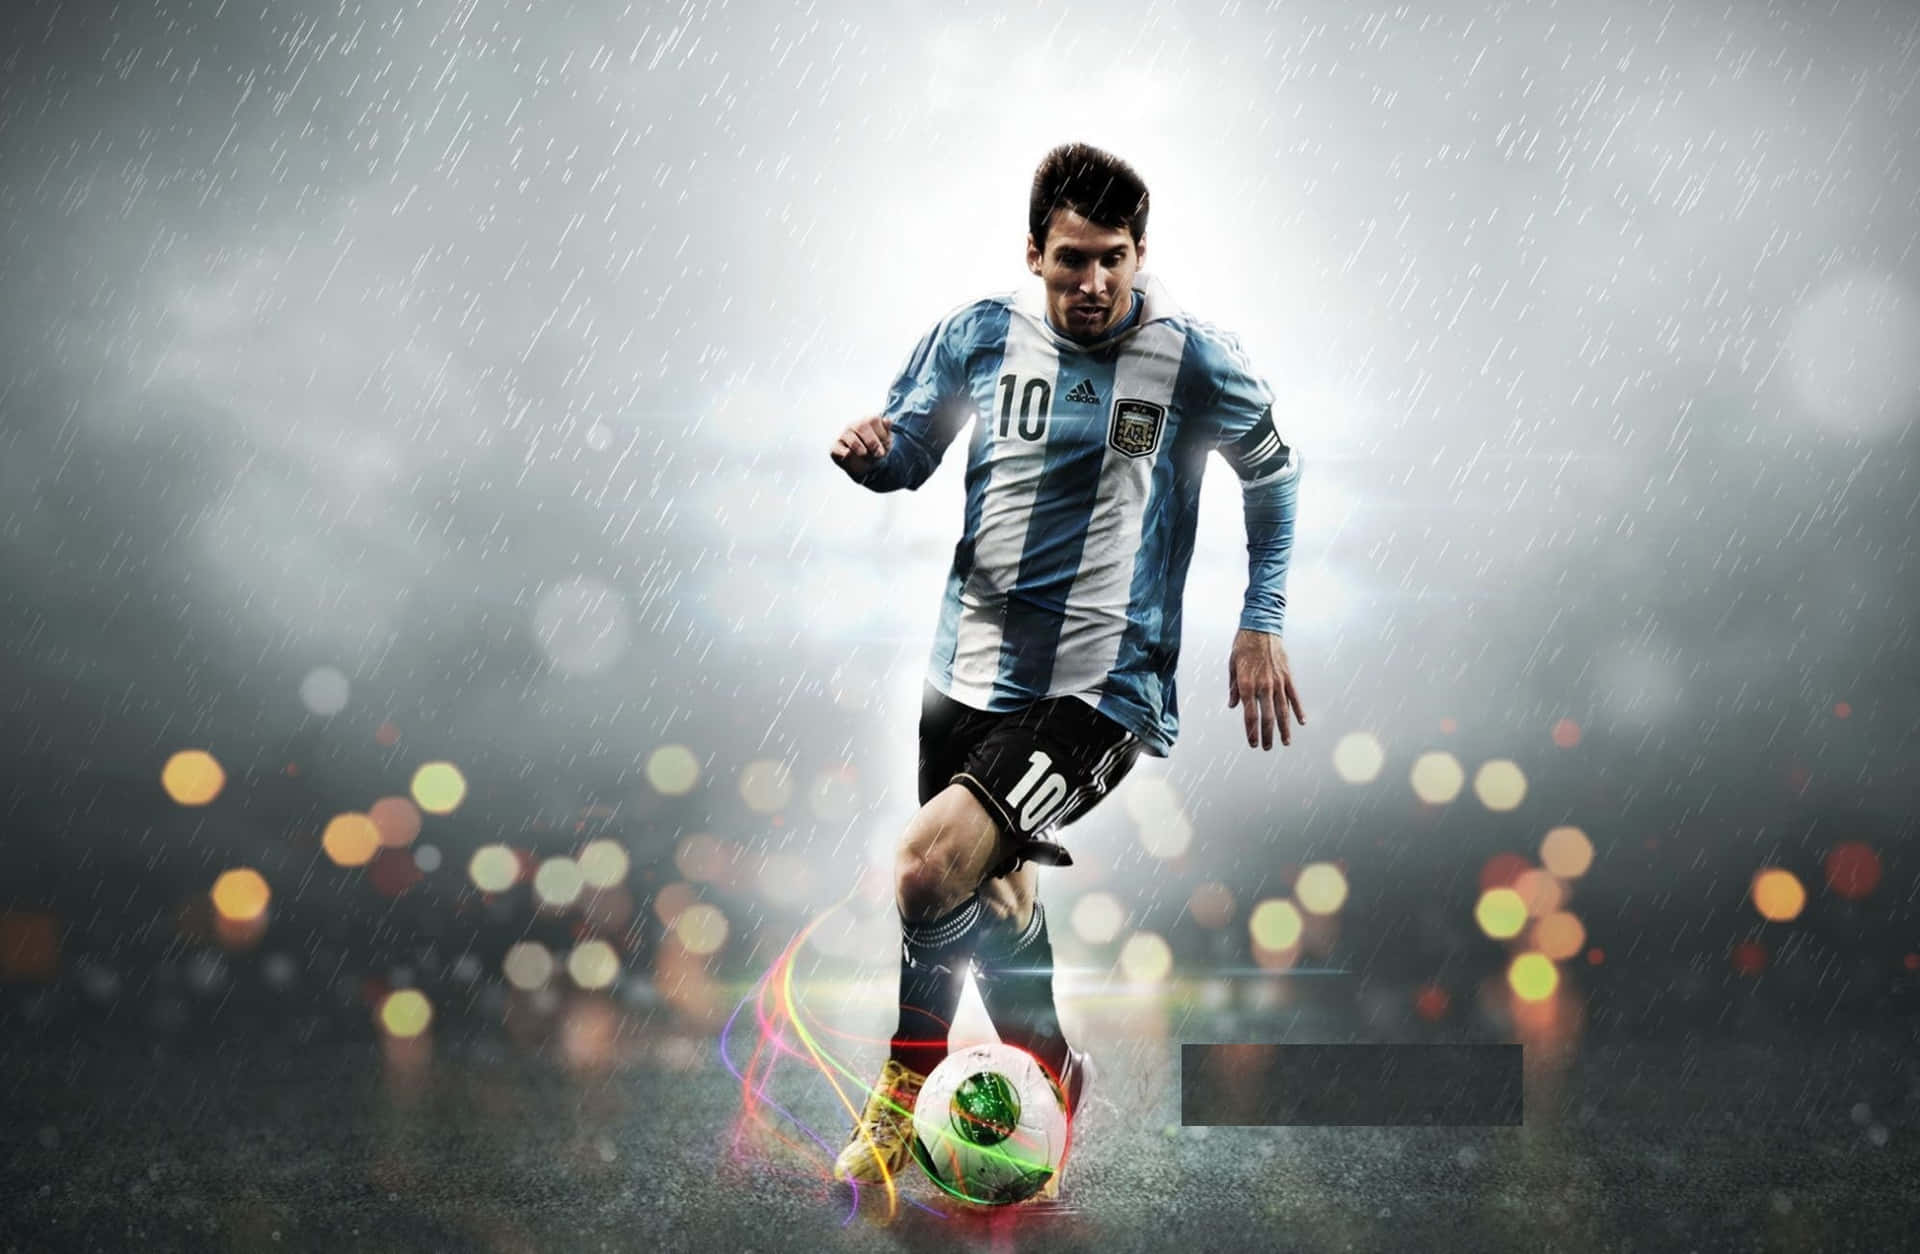 How did Messi Influence Soccer? - Quora